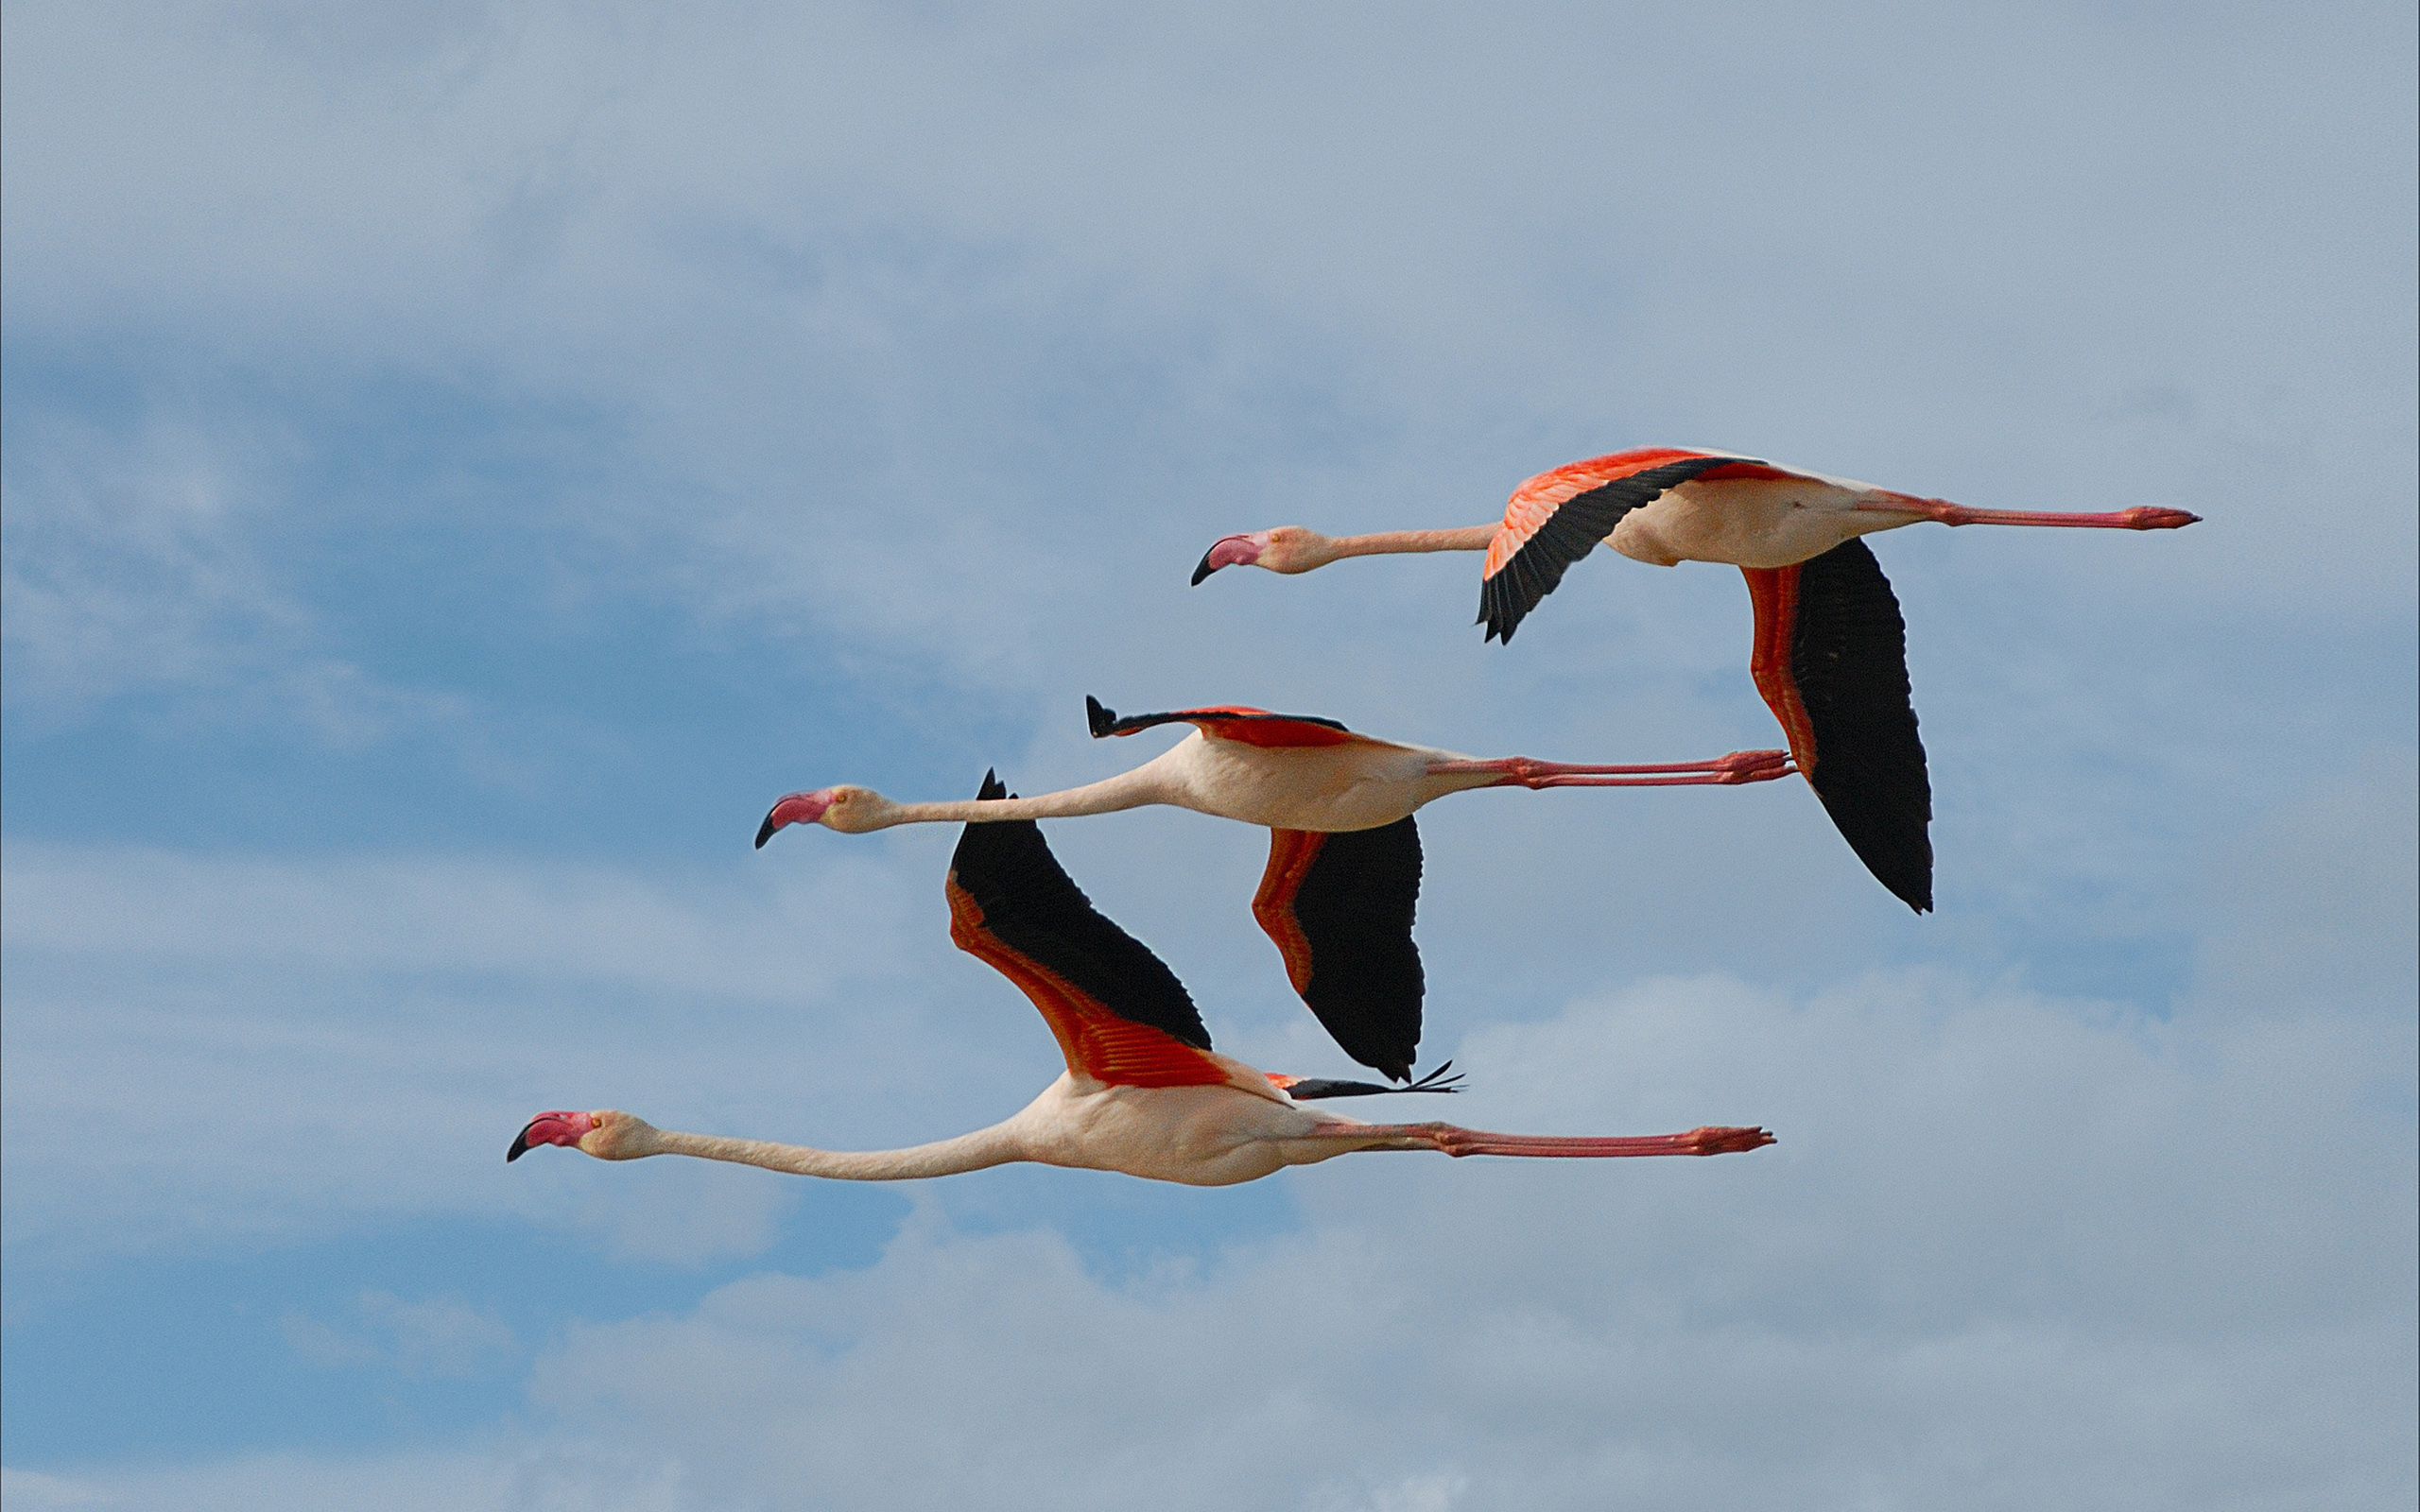 203 Birds / FlamingosHD Wallpapers and Backgrounds